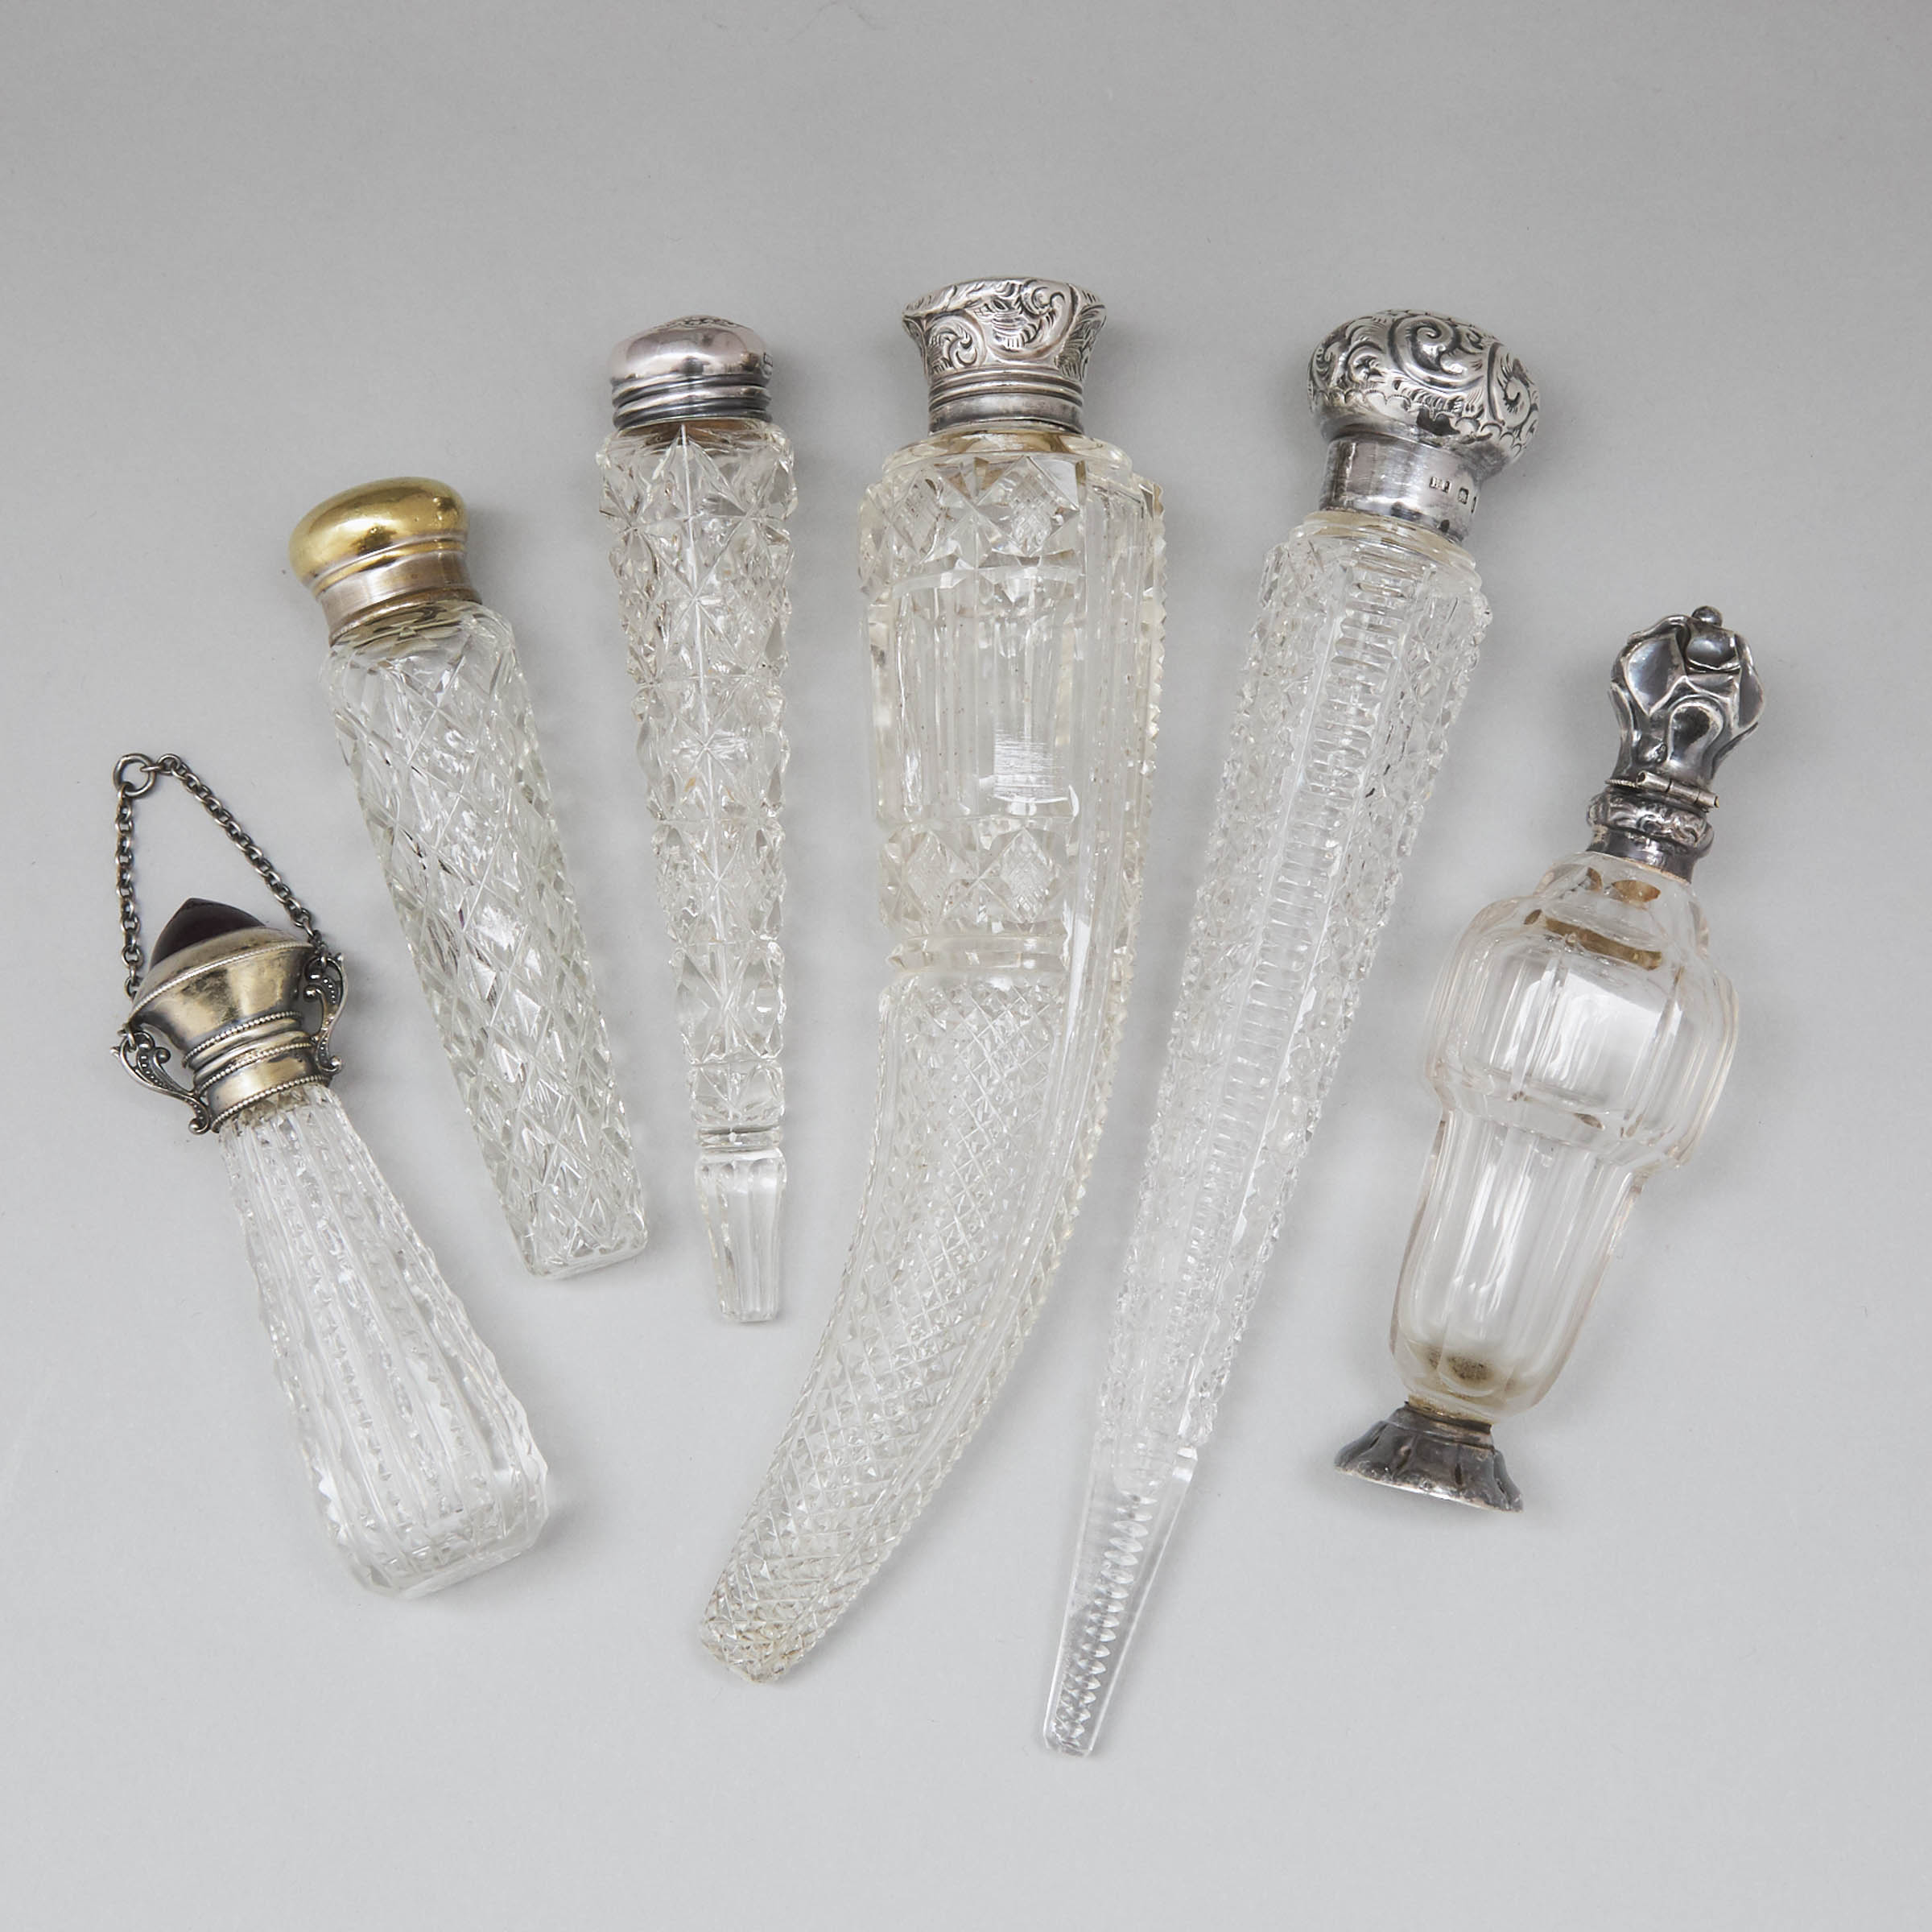 Six Silver and Metal Mounted Cut Glass Perfume Bottles and Phials, late 19th/early 20th century